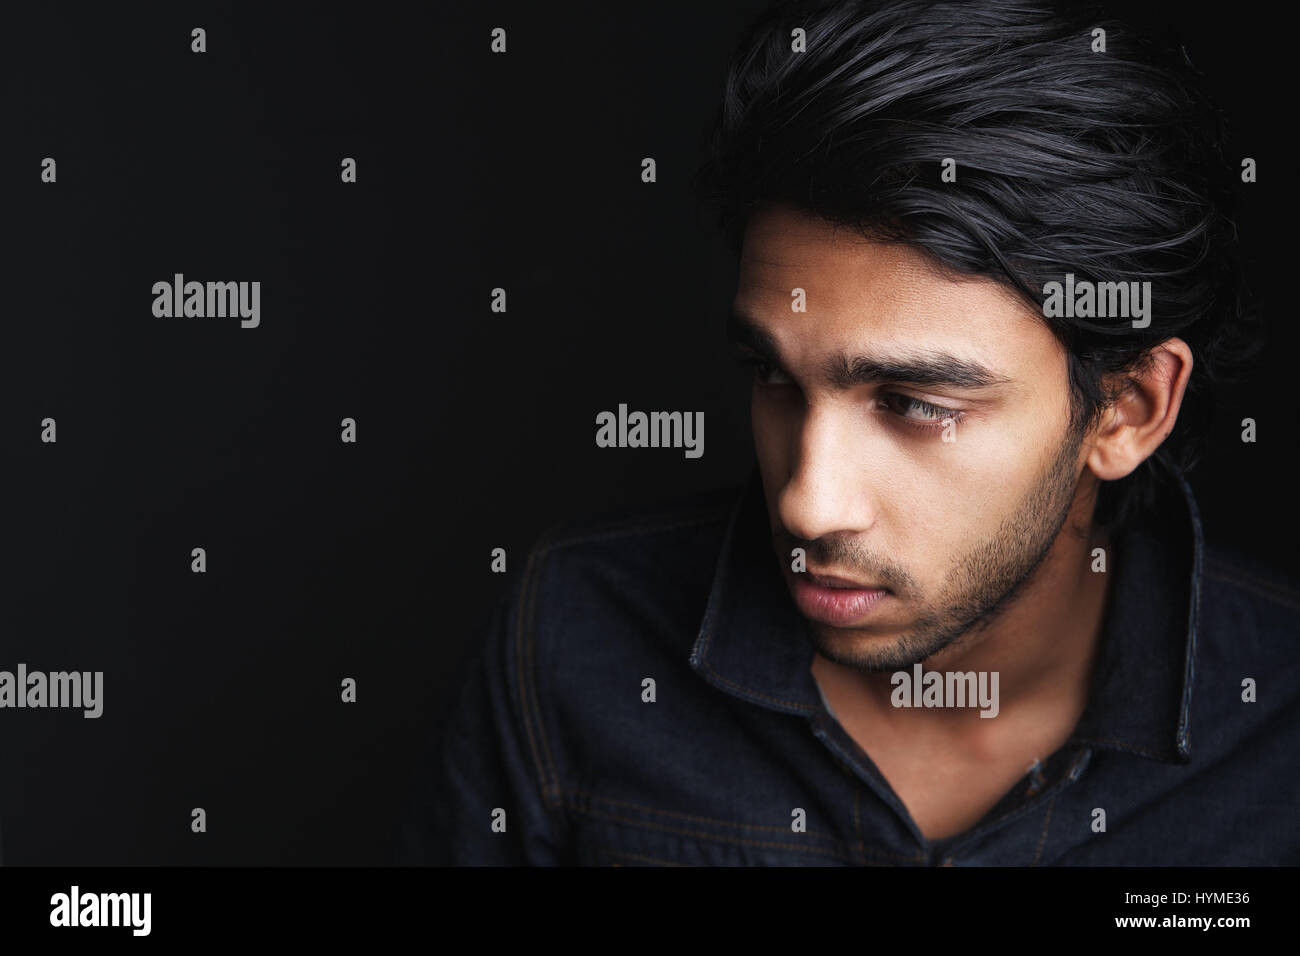 Close up portrait of an attractive young man looking away and posing against dark background Stock Photo